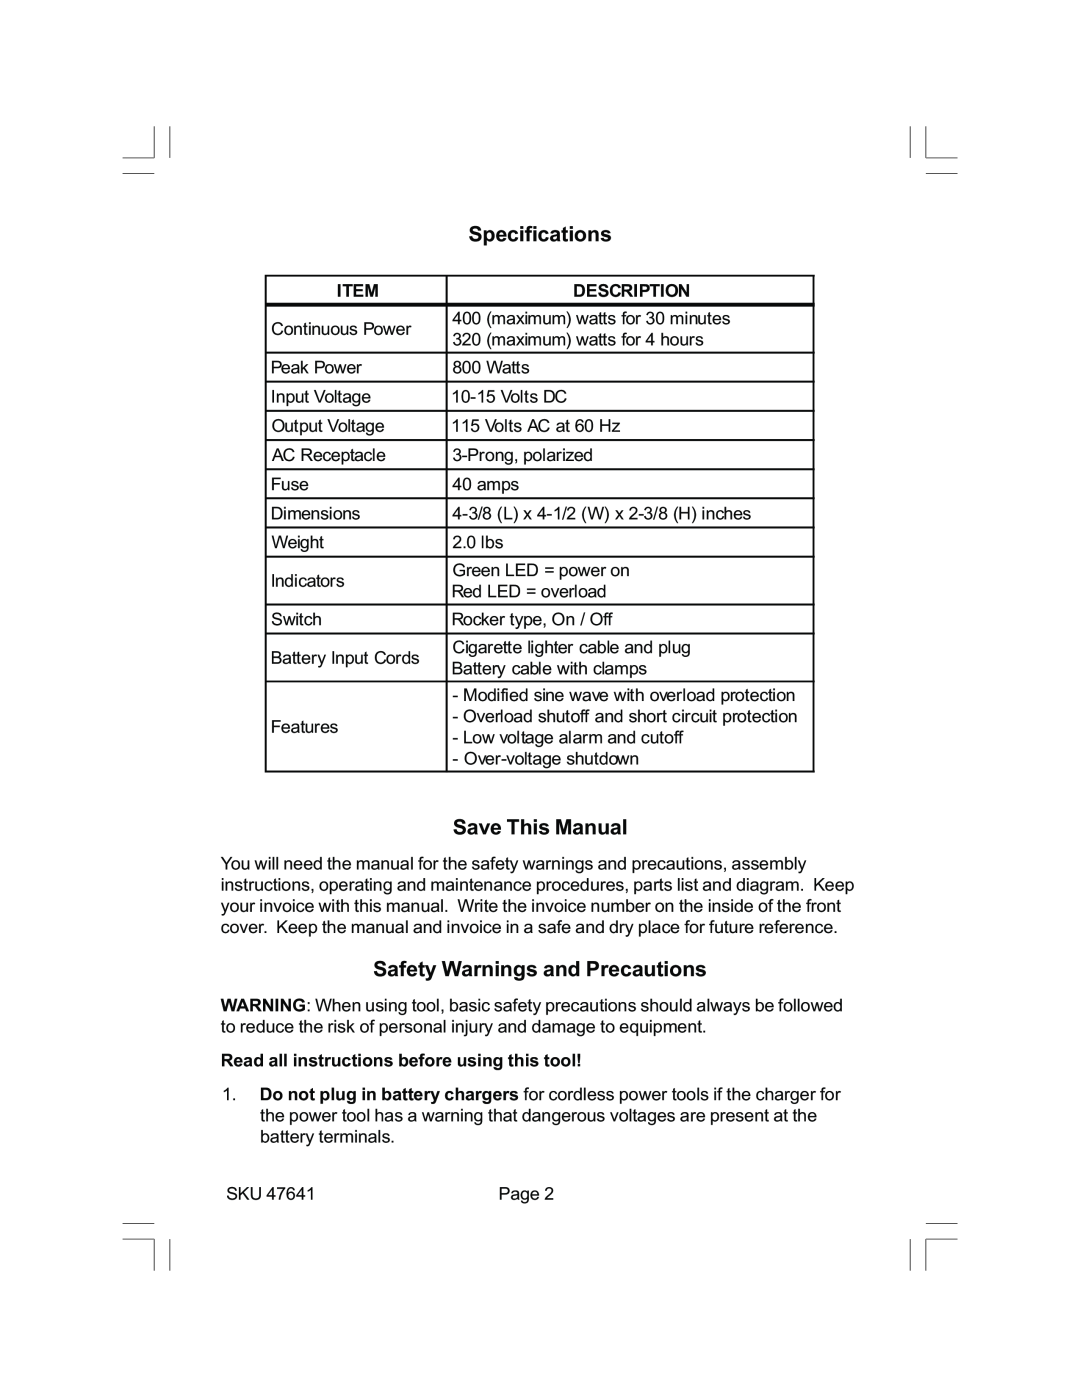 Chicago Electric 47641 operating instructions Specifications Save This Manual, Safety Warnings and Precautions 